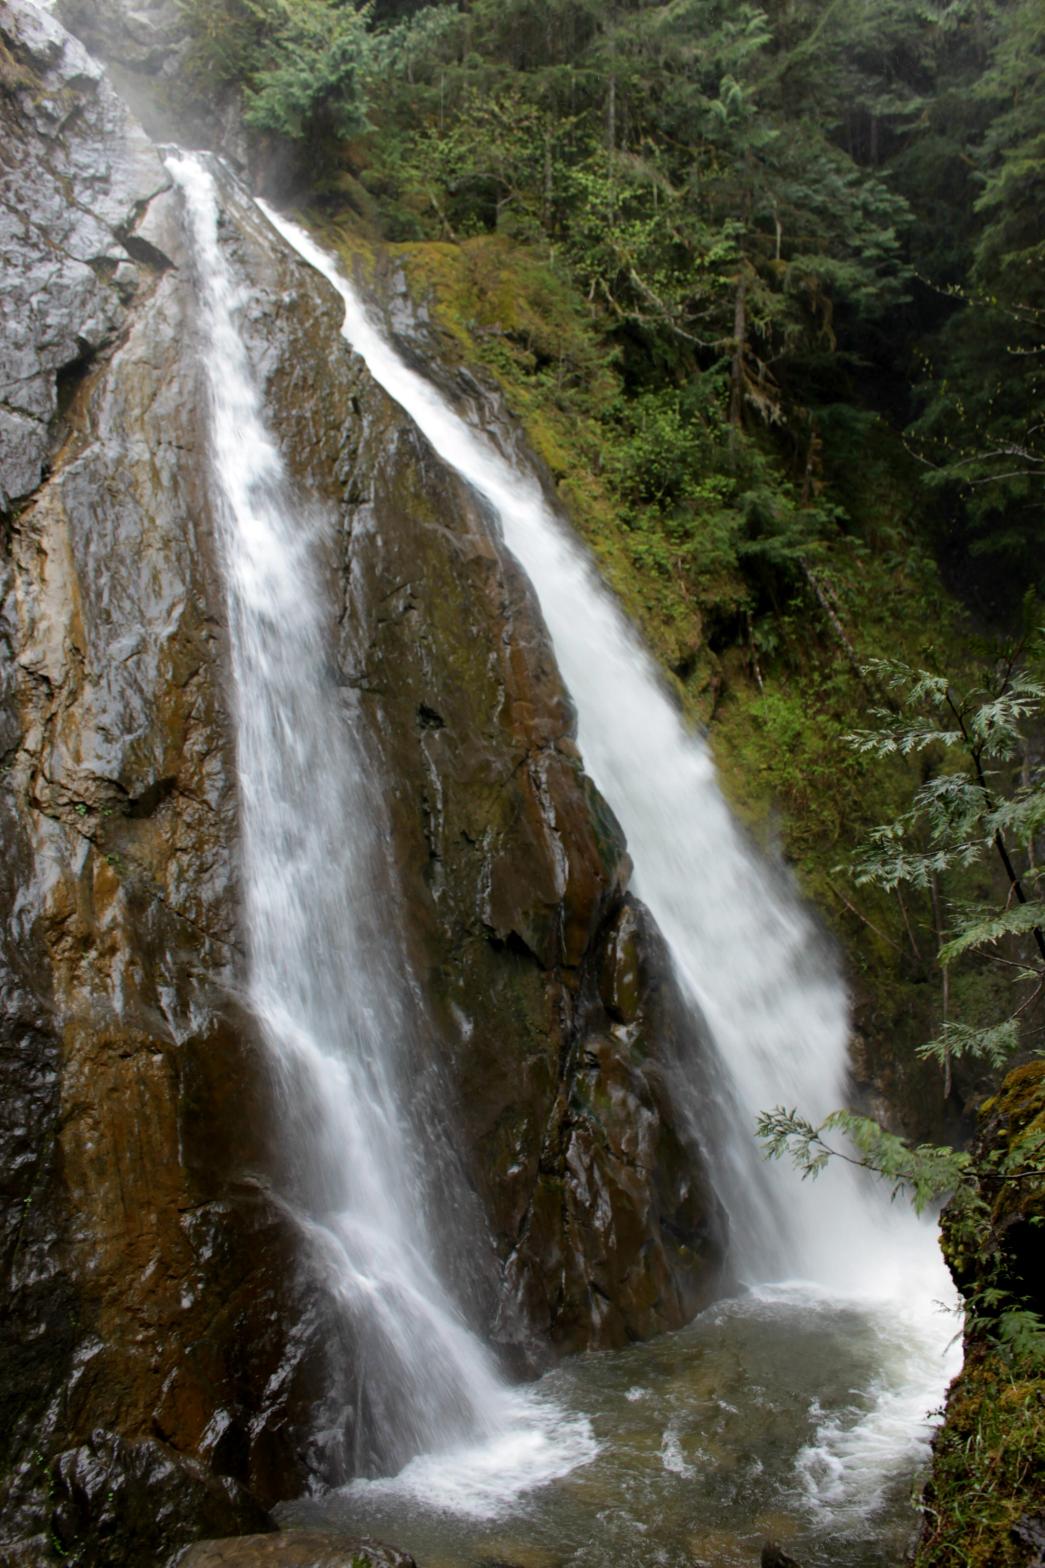 Side view of the main portion of Cornell Creek Falls